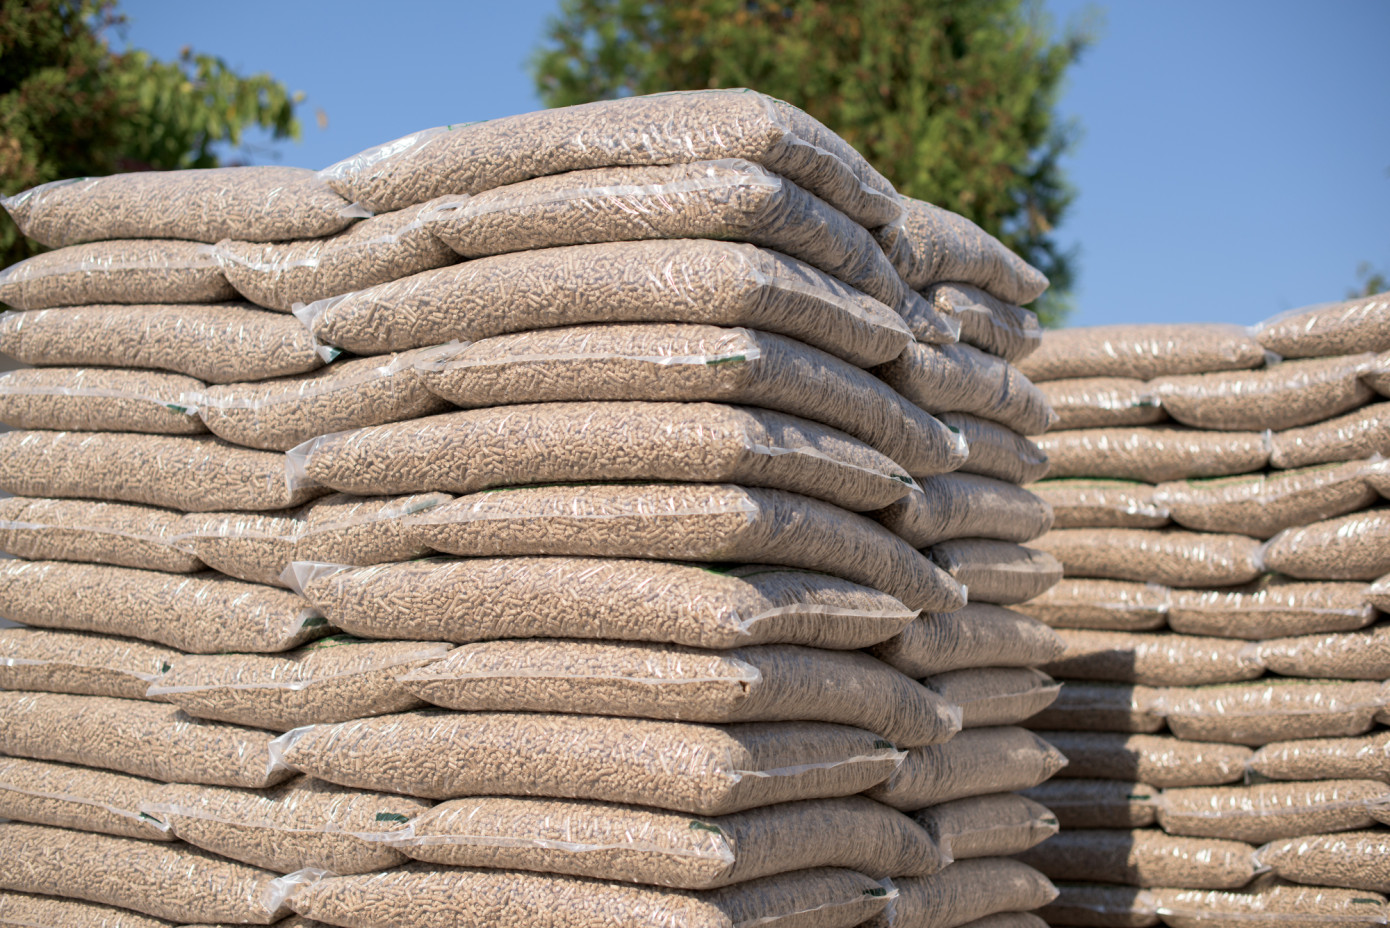 Asia increases its share of global wood pellet imports to record 32%